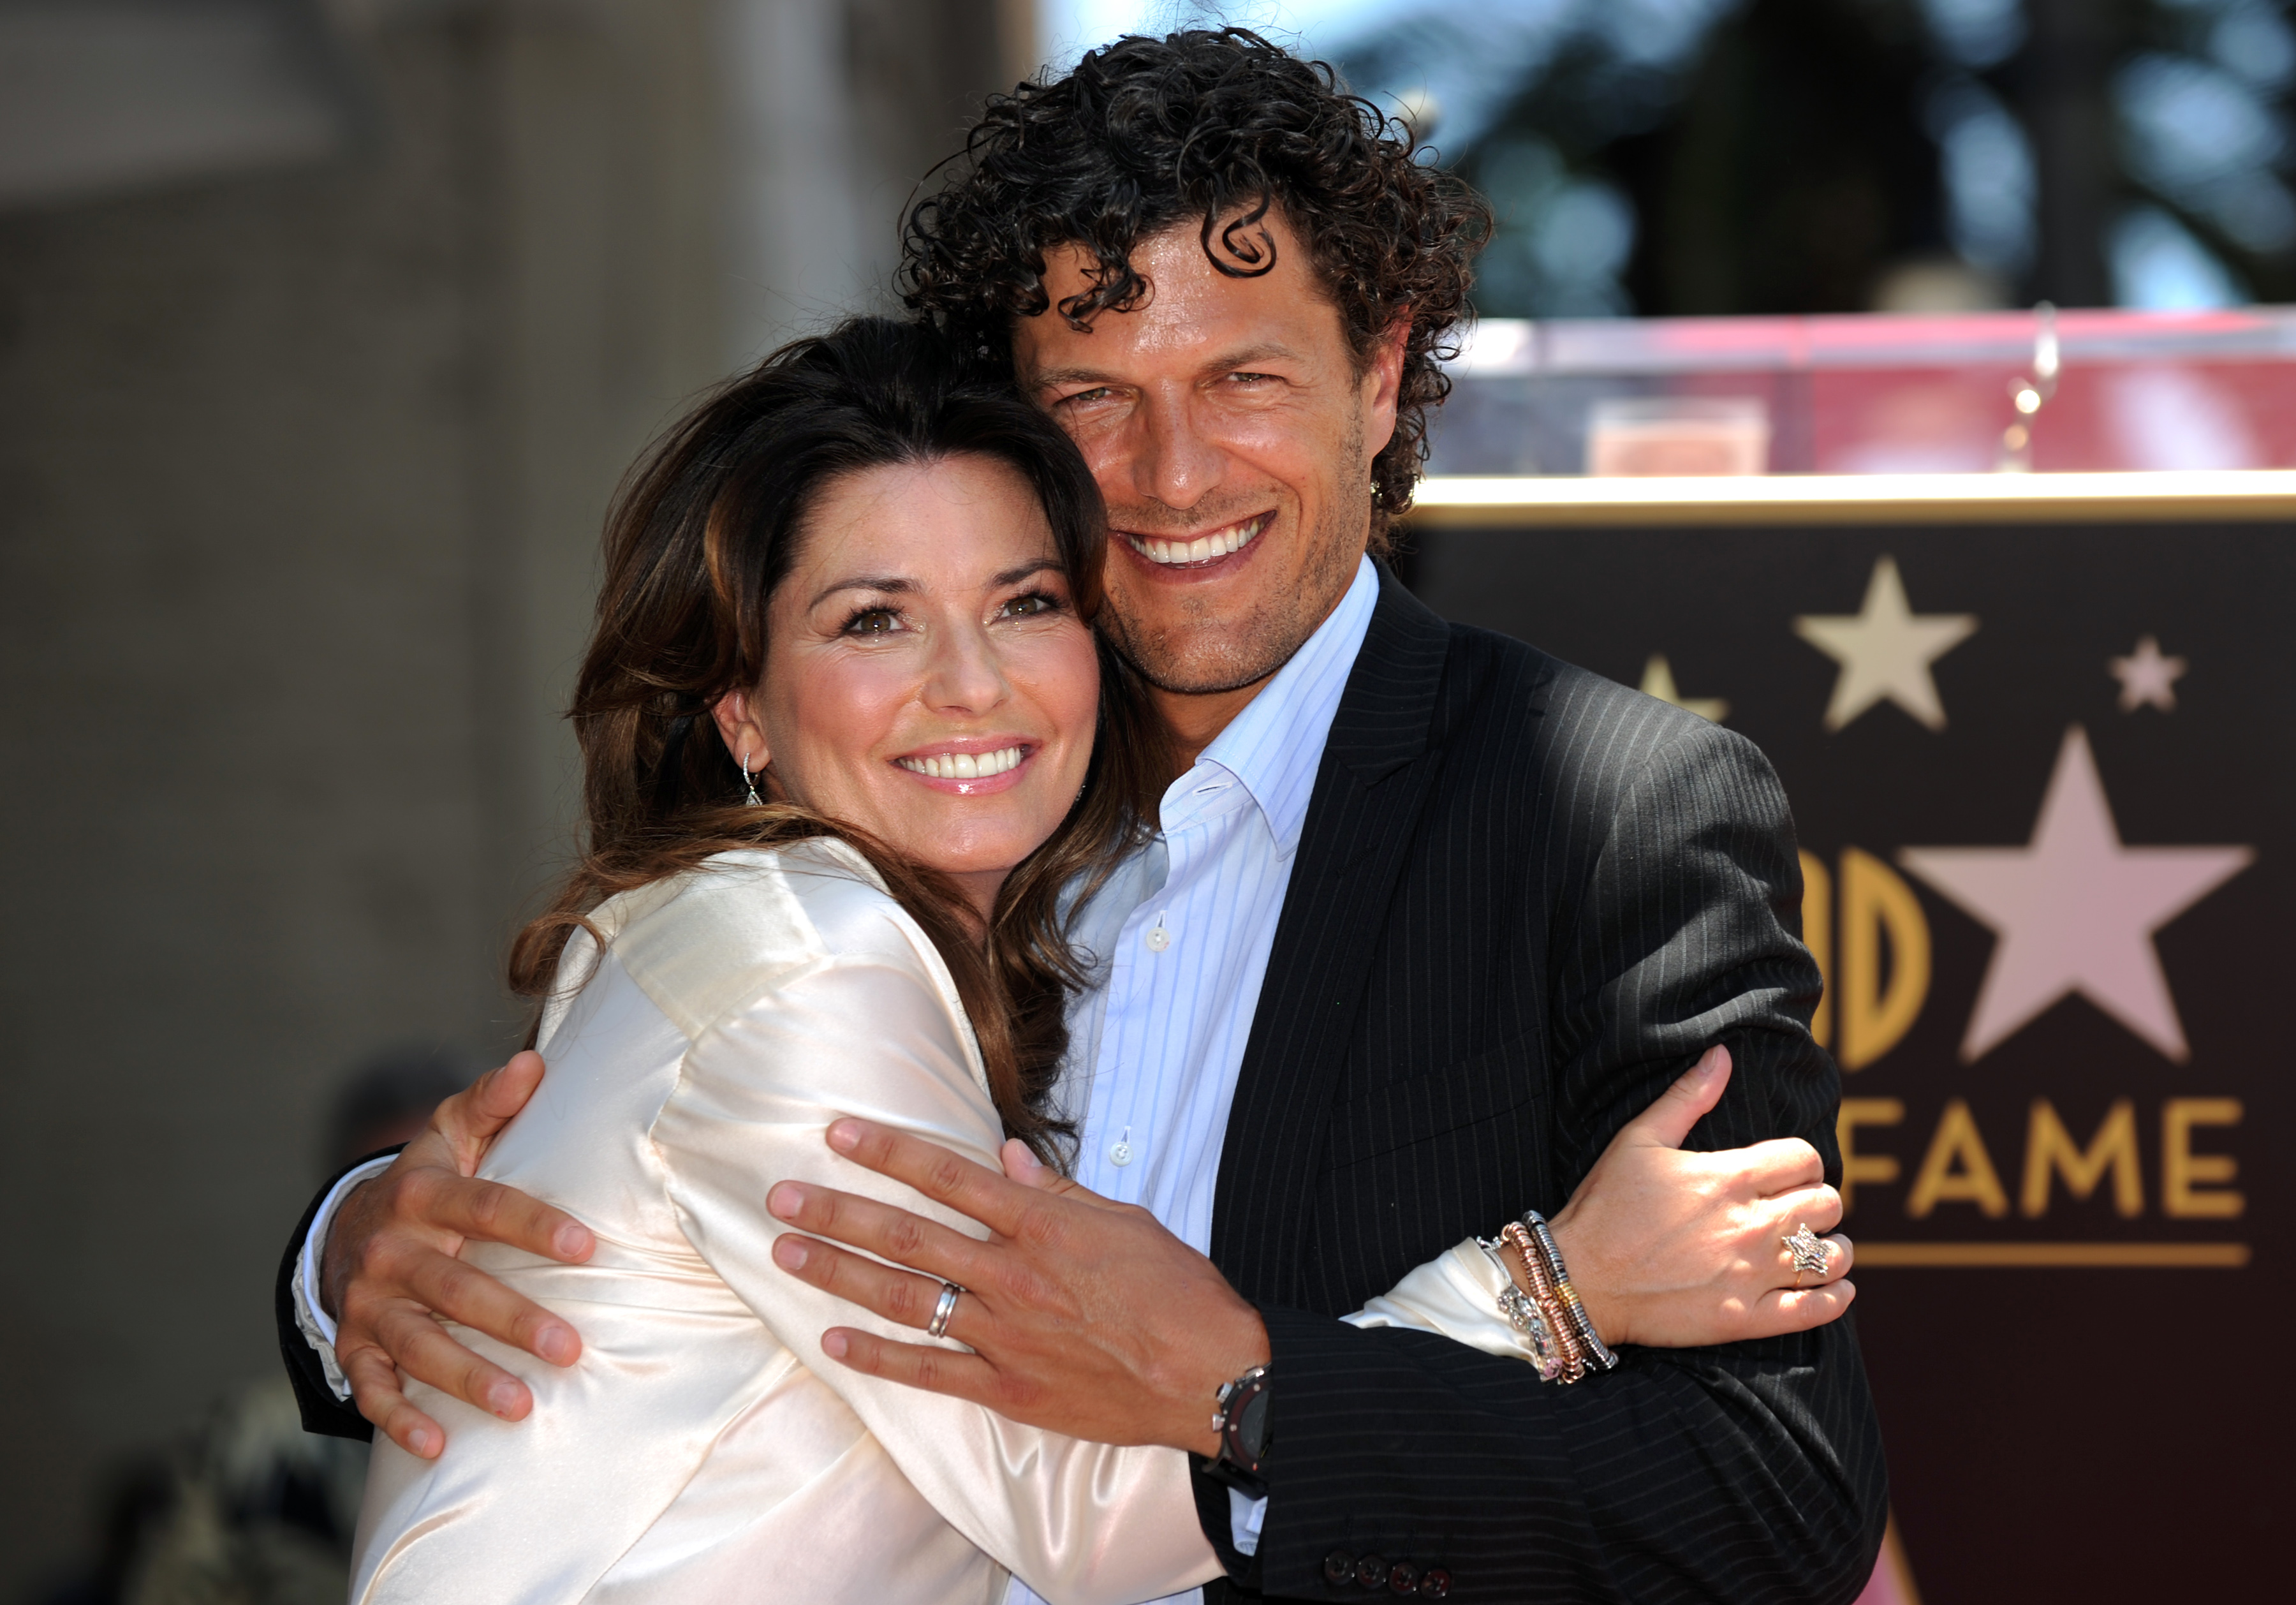 Shania Twain and Frederic Nicolas Thiebaud in Hollywood, California on June 2, 2011 | Source: Getty Images